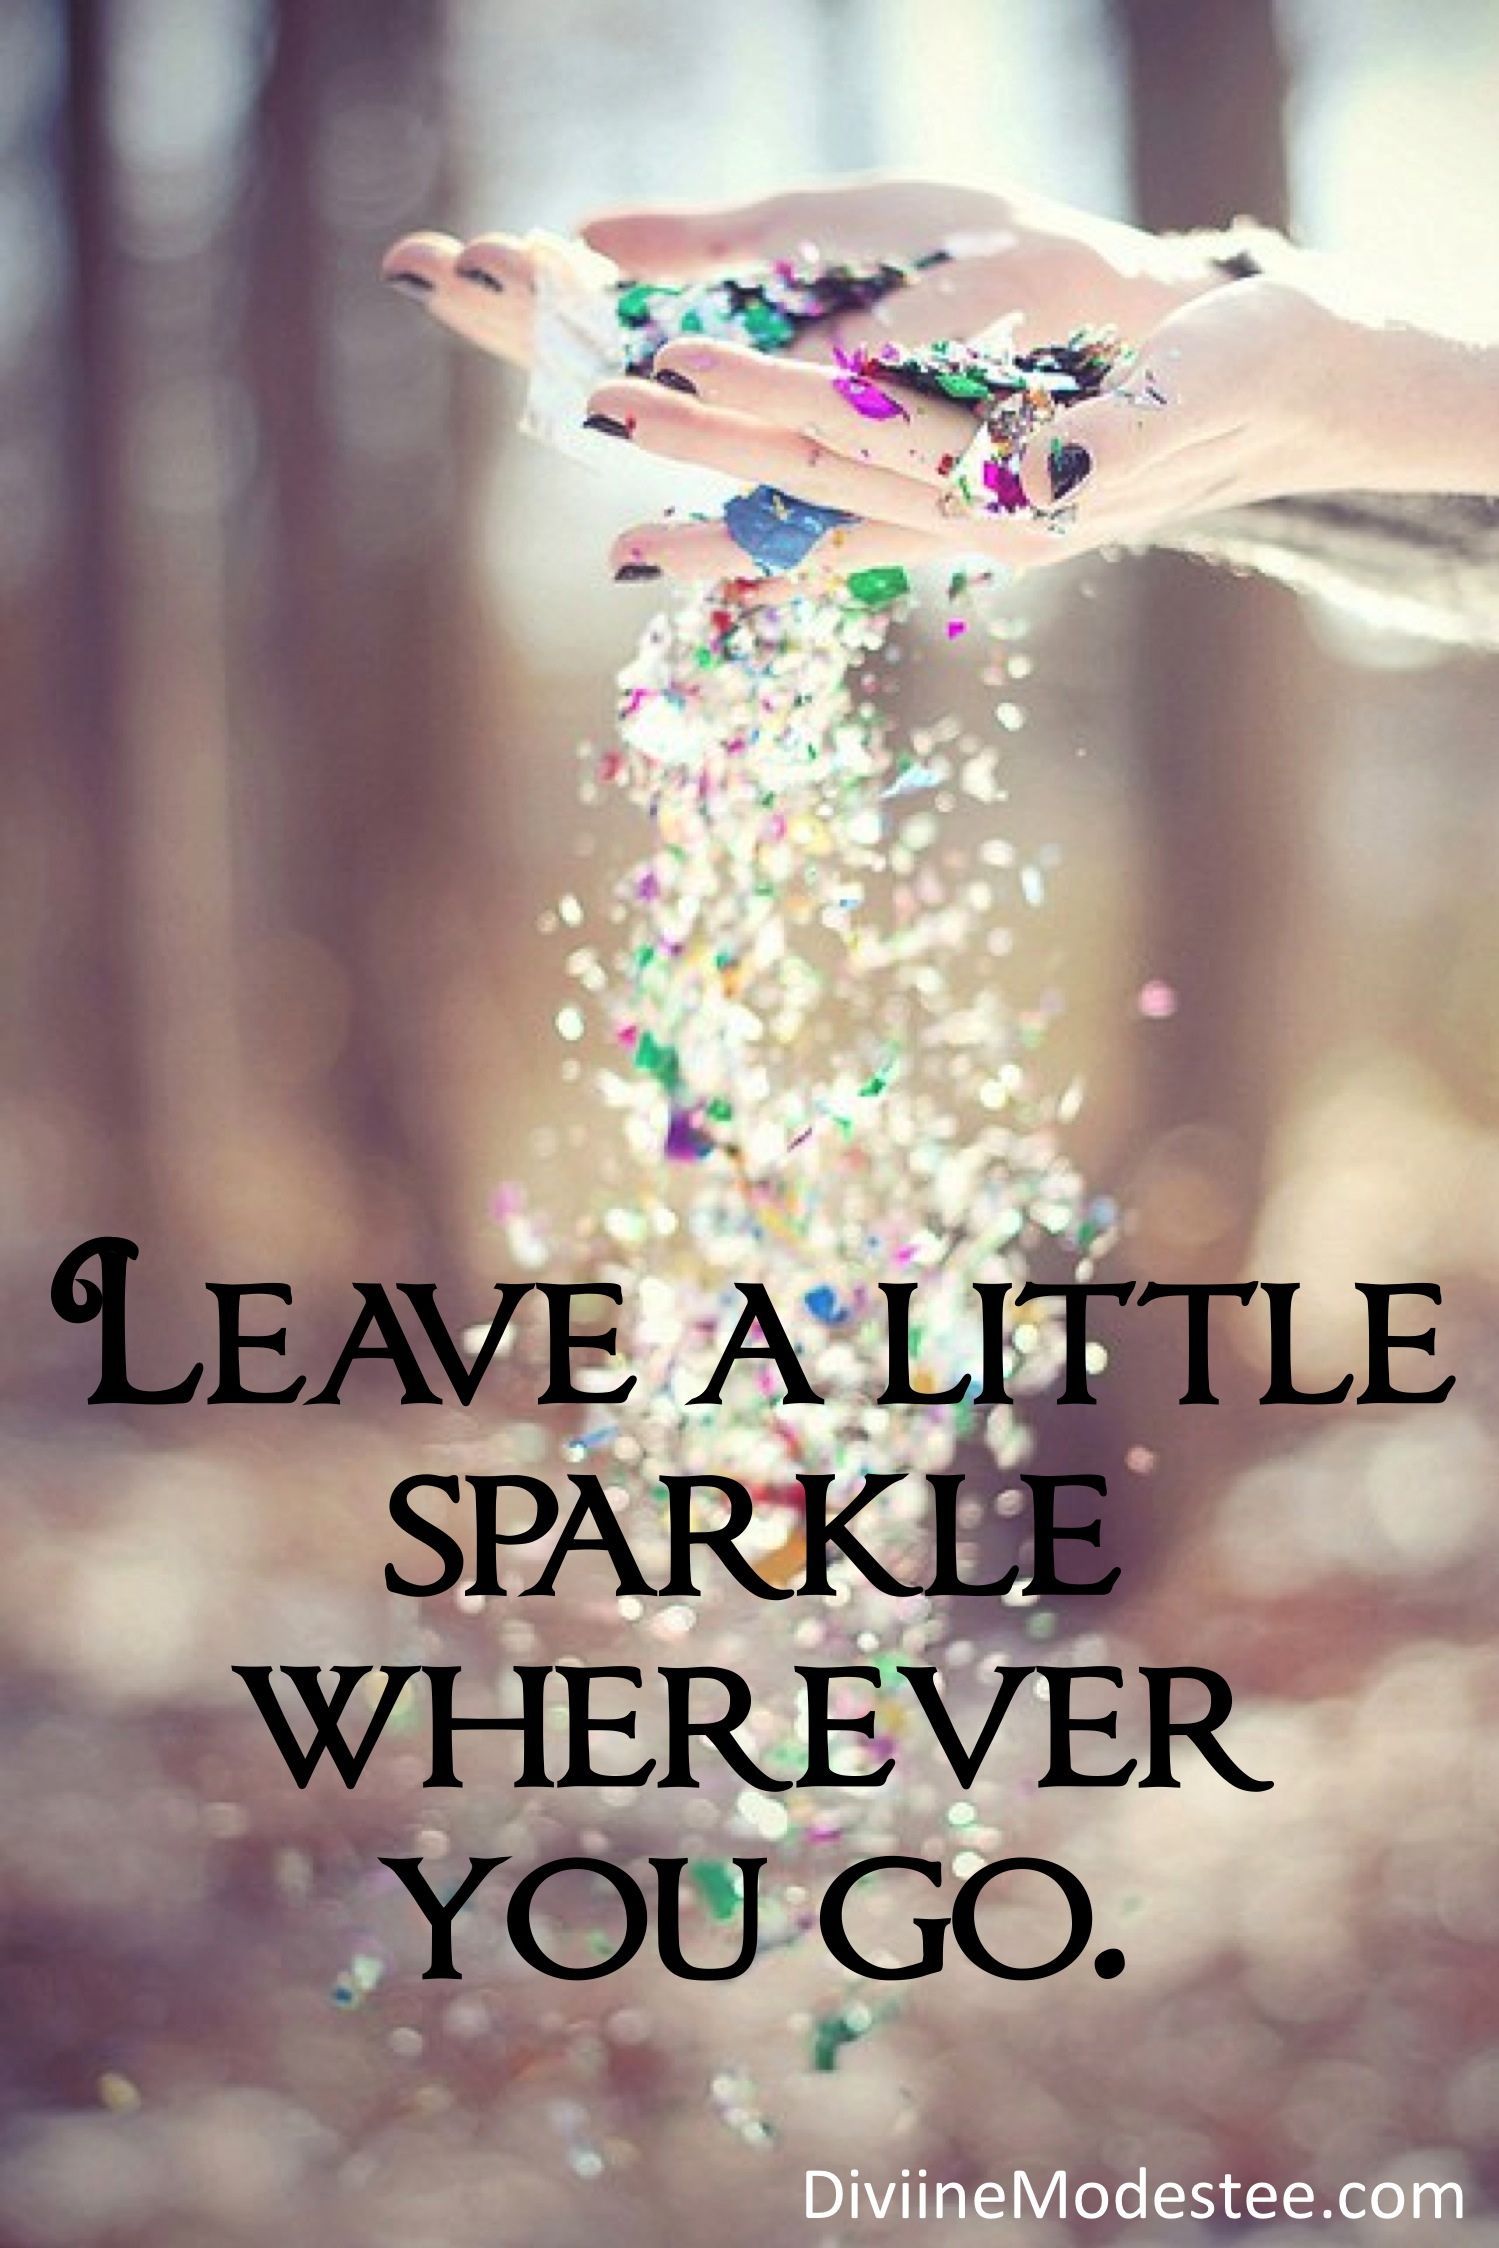 Words to live by: “Leave a little sparkle wherever you go.”